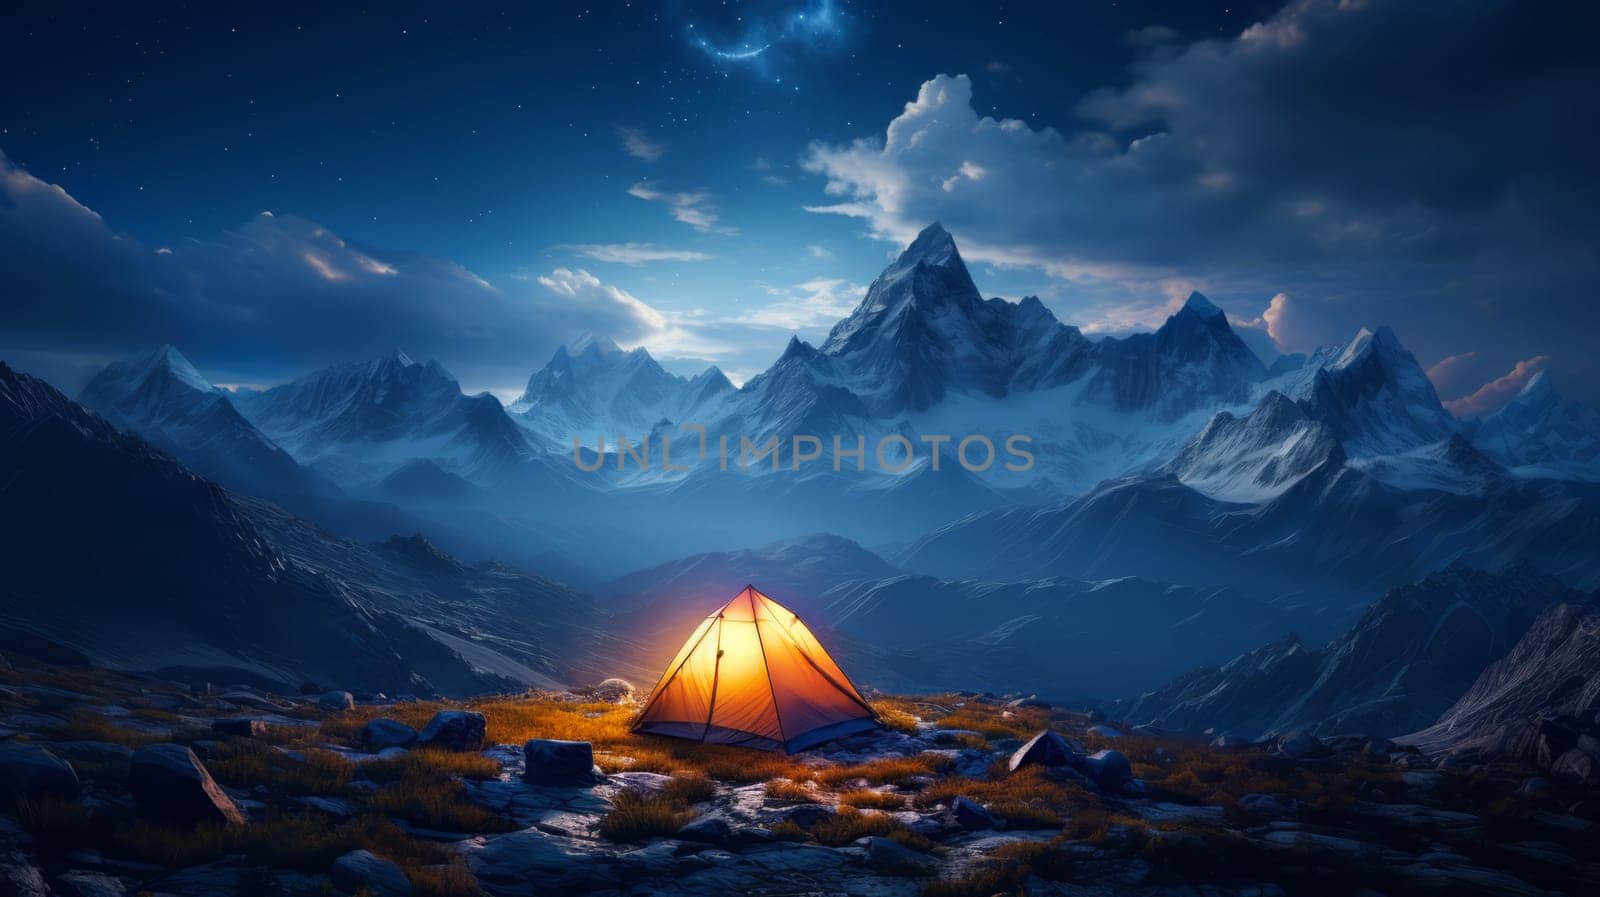 Tent in the mountains under the stars by NataliPopova